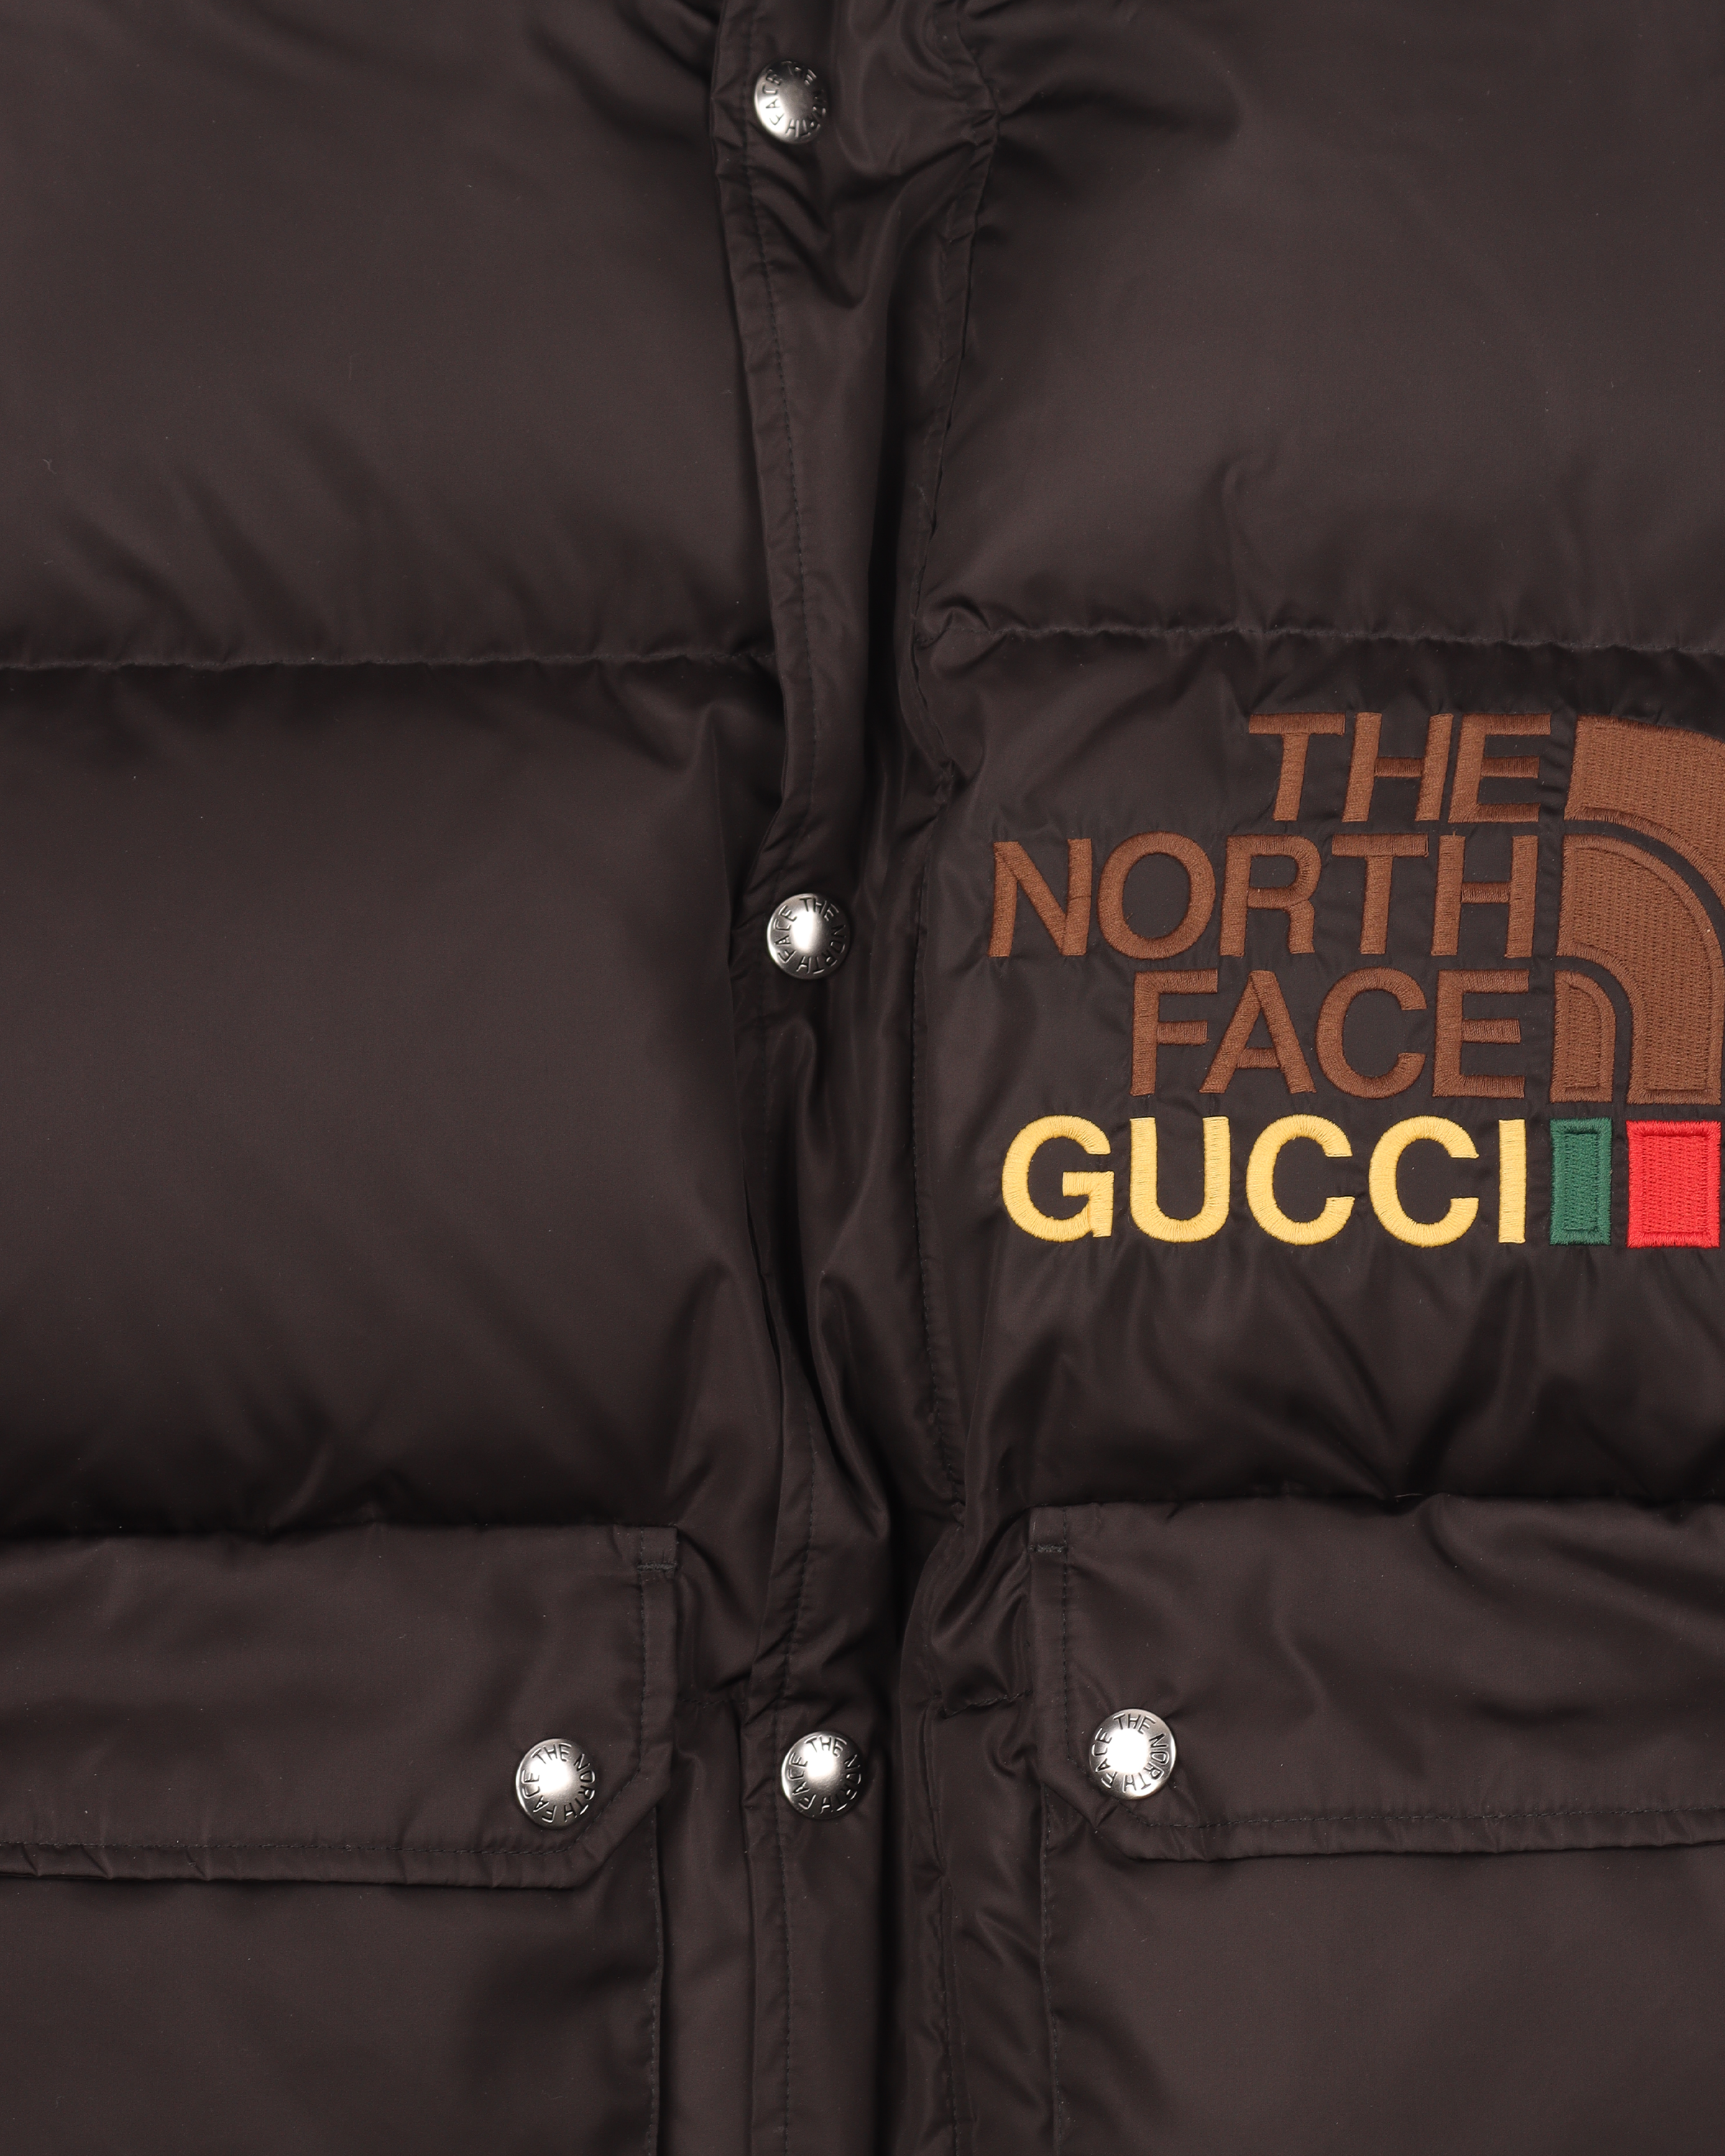 WornOnTV: Lisa's beige The North Face Gucci puffer jacket on The